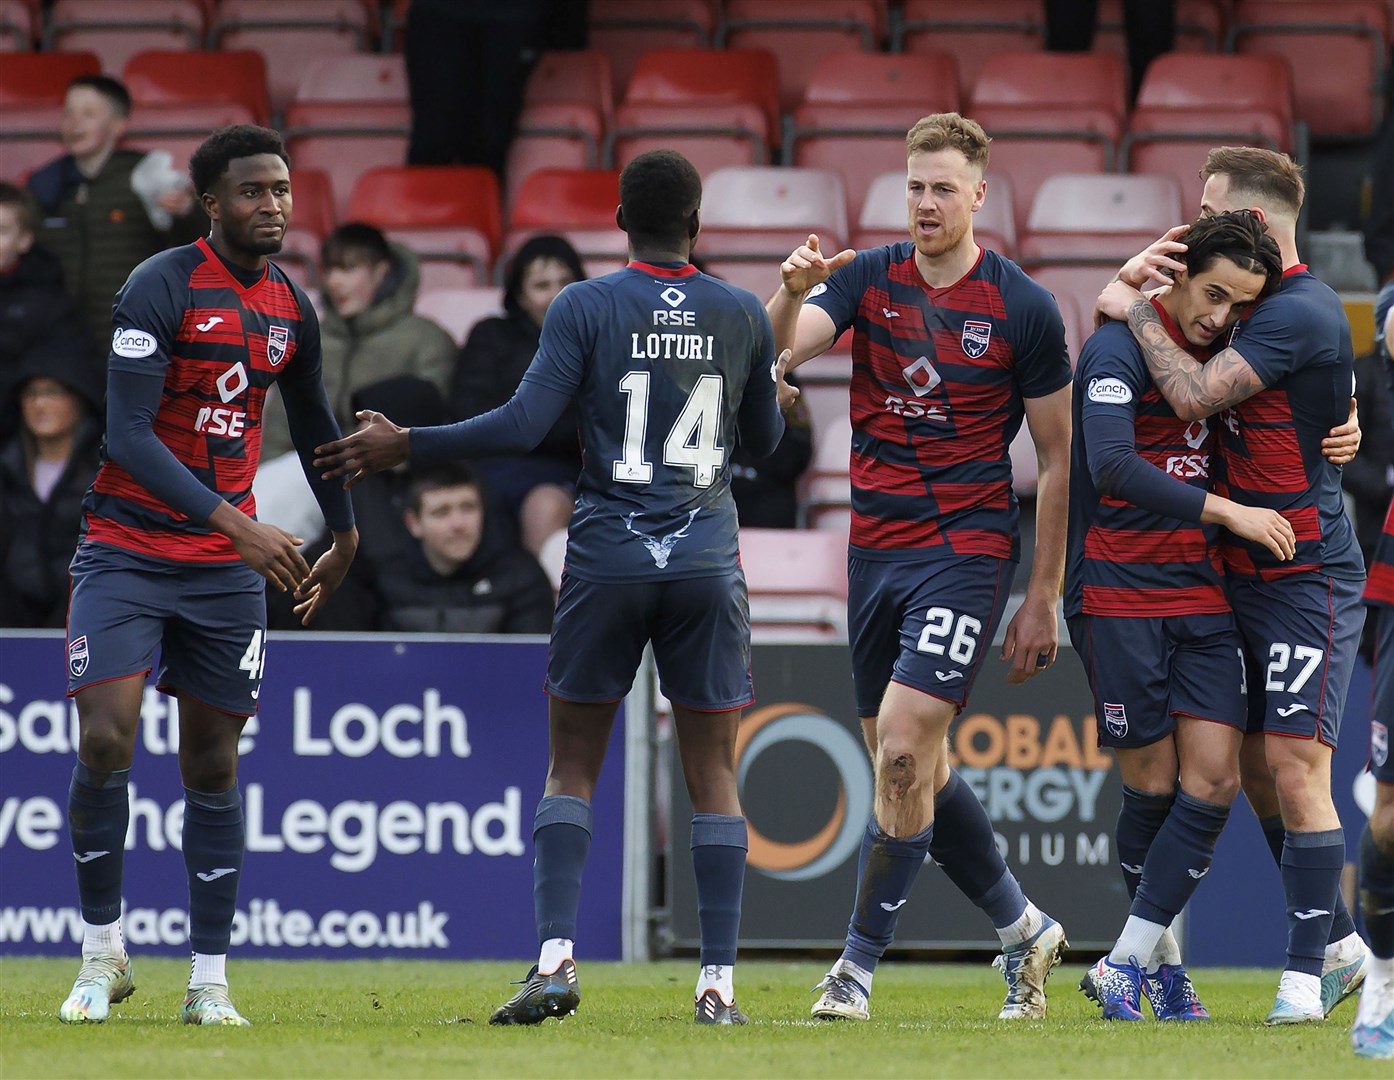 Ross County won 4–0 in their last match.